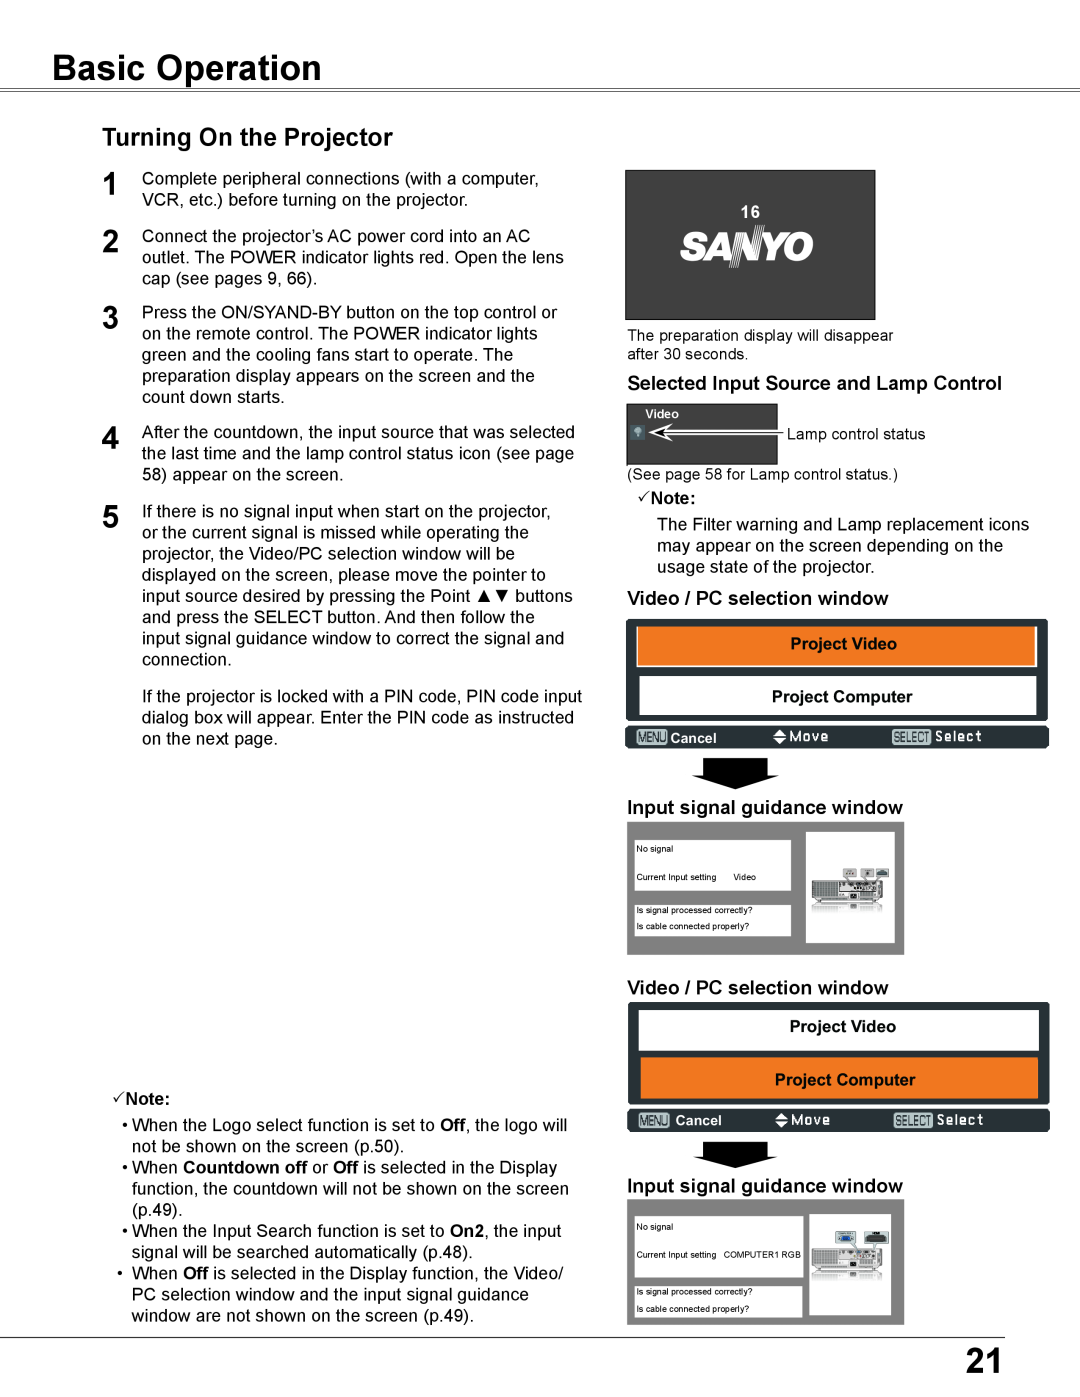 Sanyo WXU700A owner manual Basic Operation, Turning On the Projector, Selected Input Source and Lamp Control, Note 